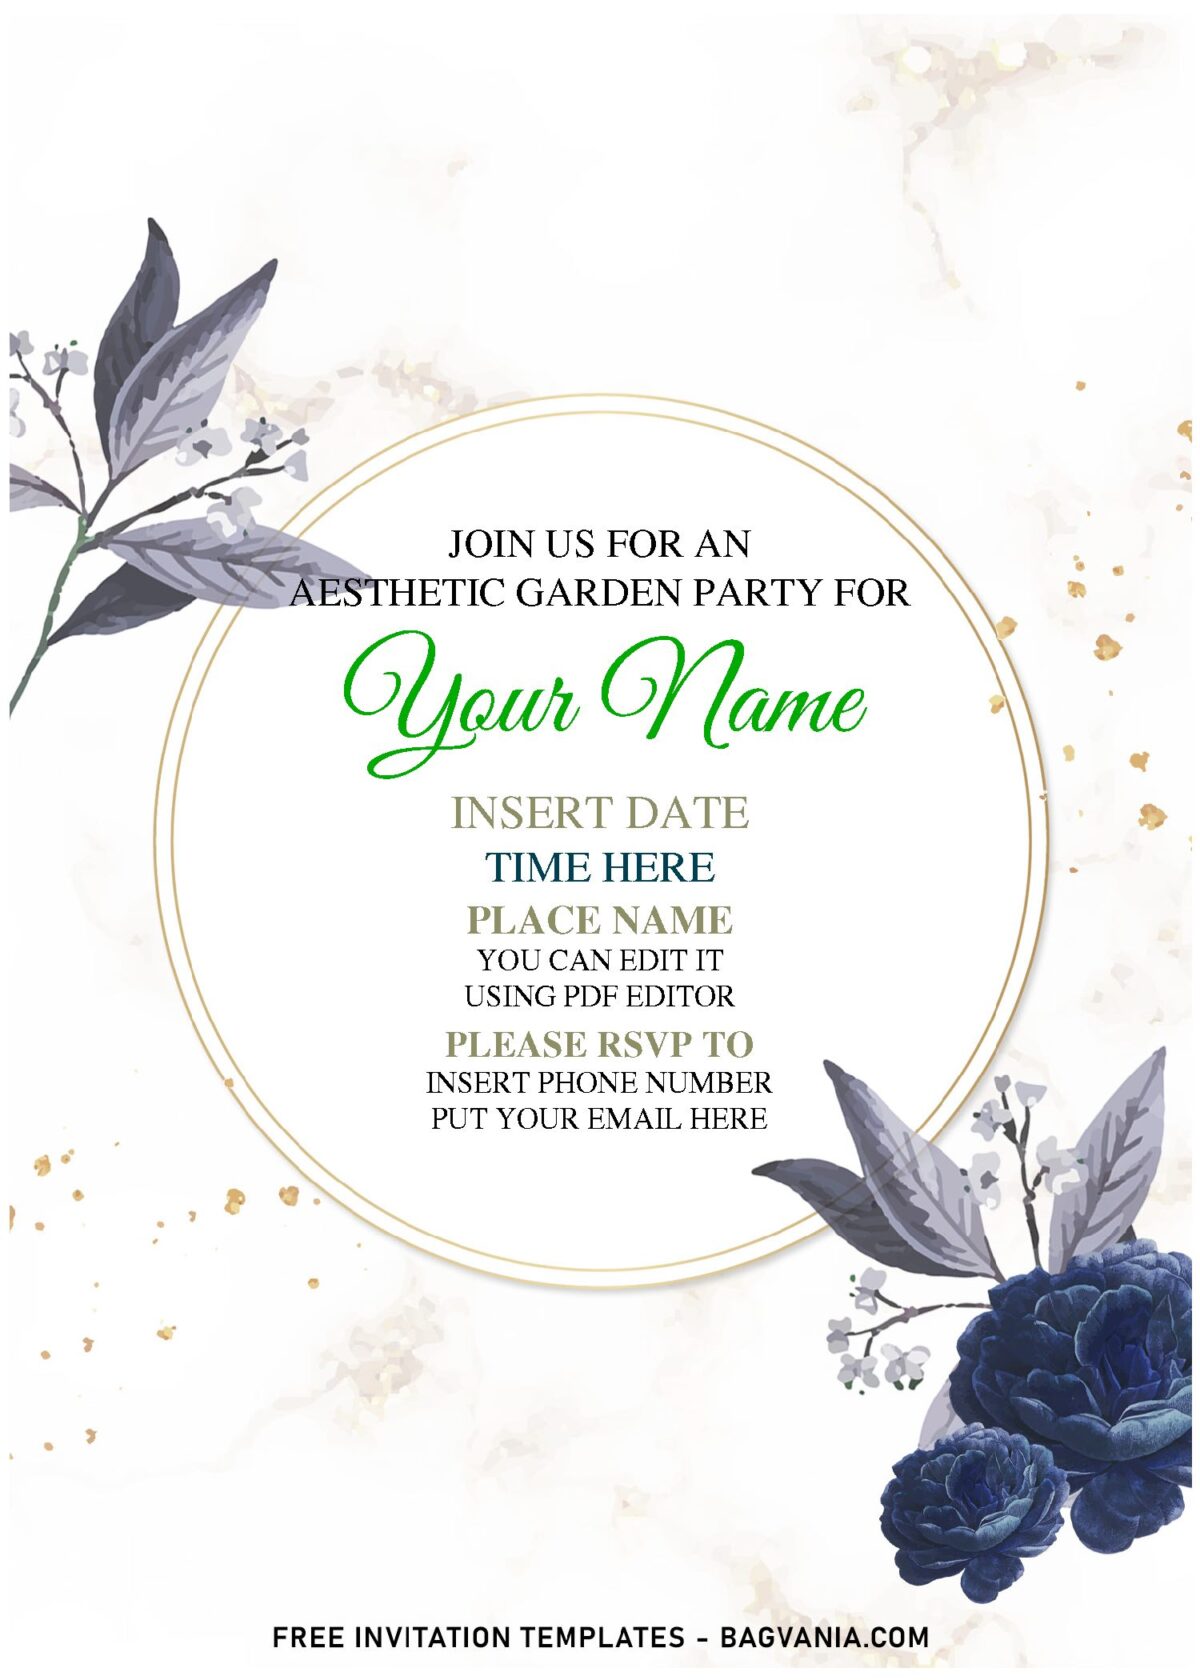 (Free Editable PDF) Dusty Marble Camellia And Miller Birthday Invitation Templates with elegant script